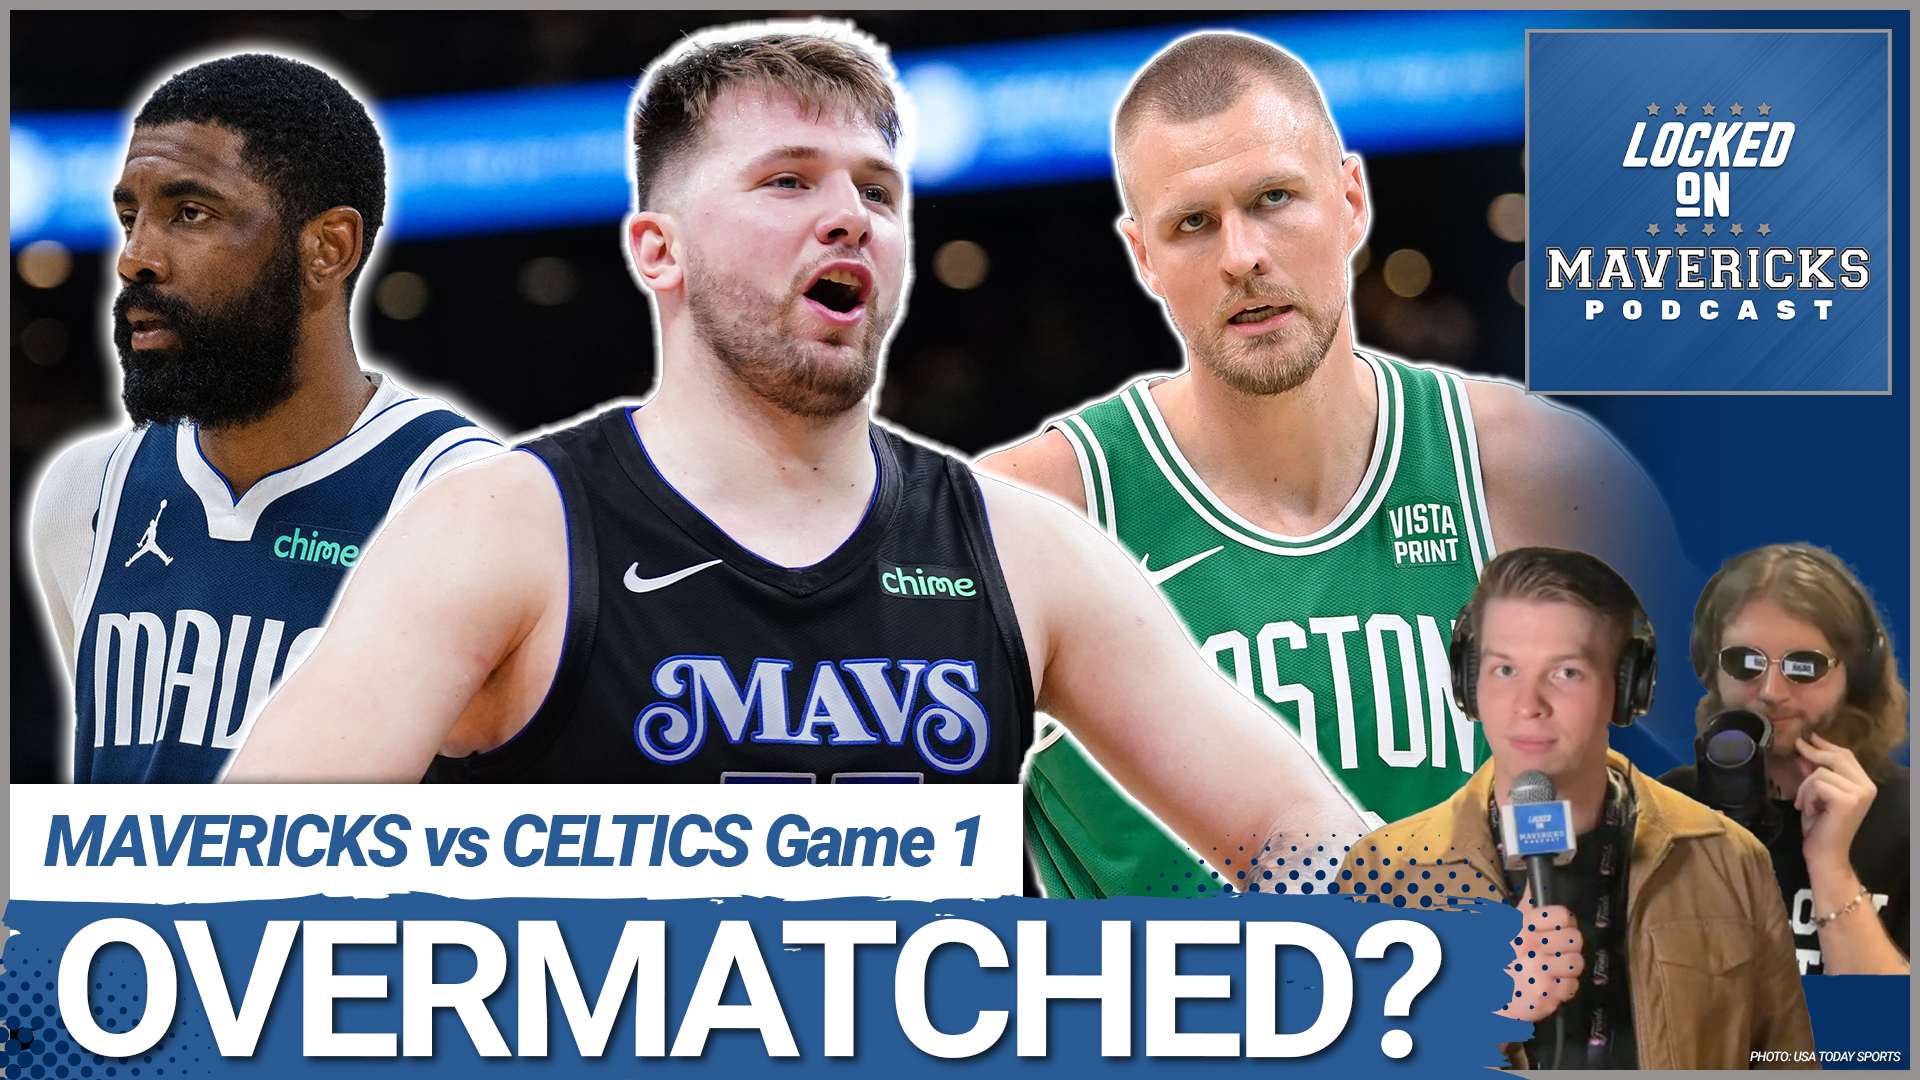 Nick Angstadt & Slightly Biased breakdown how the Dallas Mavericks showed positive signs in their Game 1 loss to the Boston Celtics.